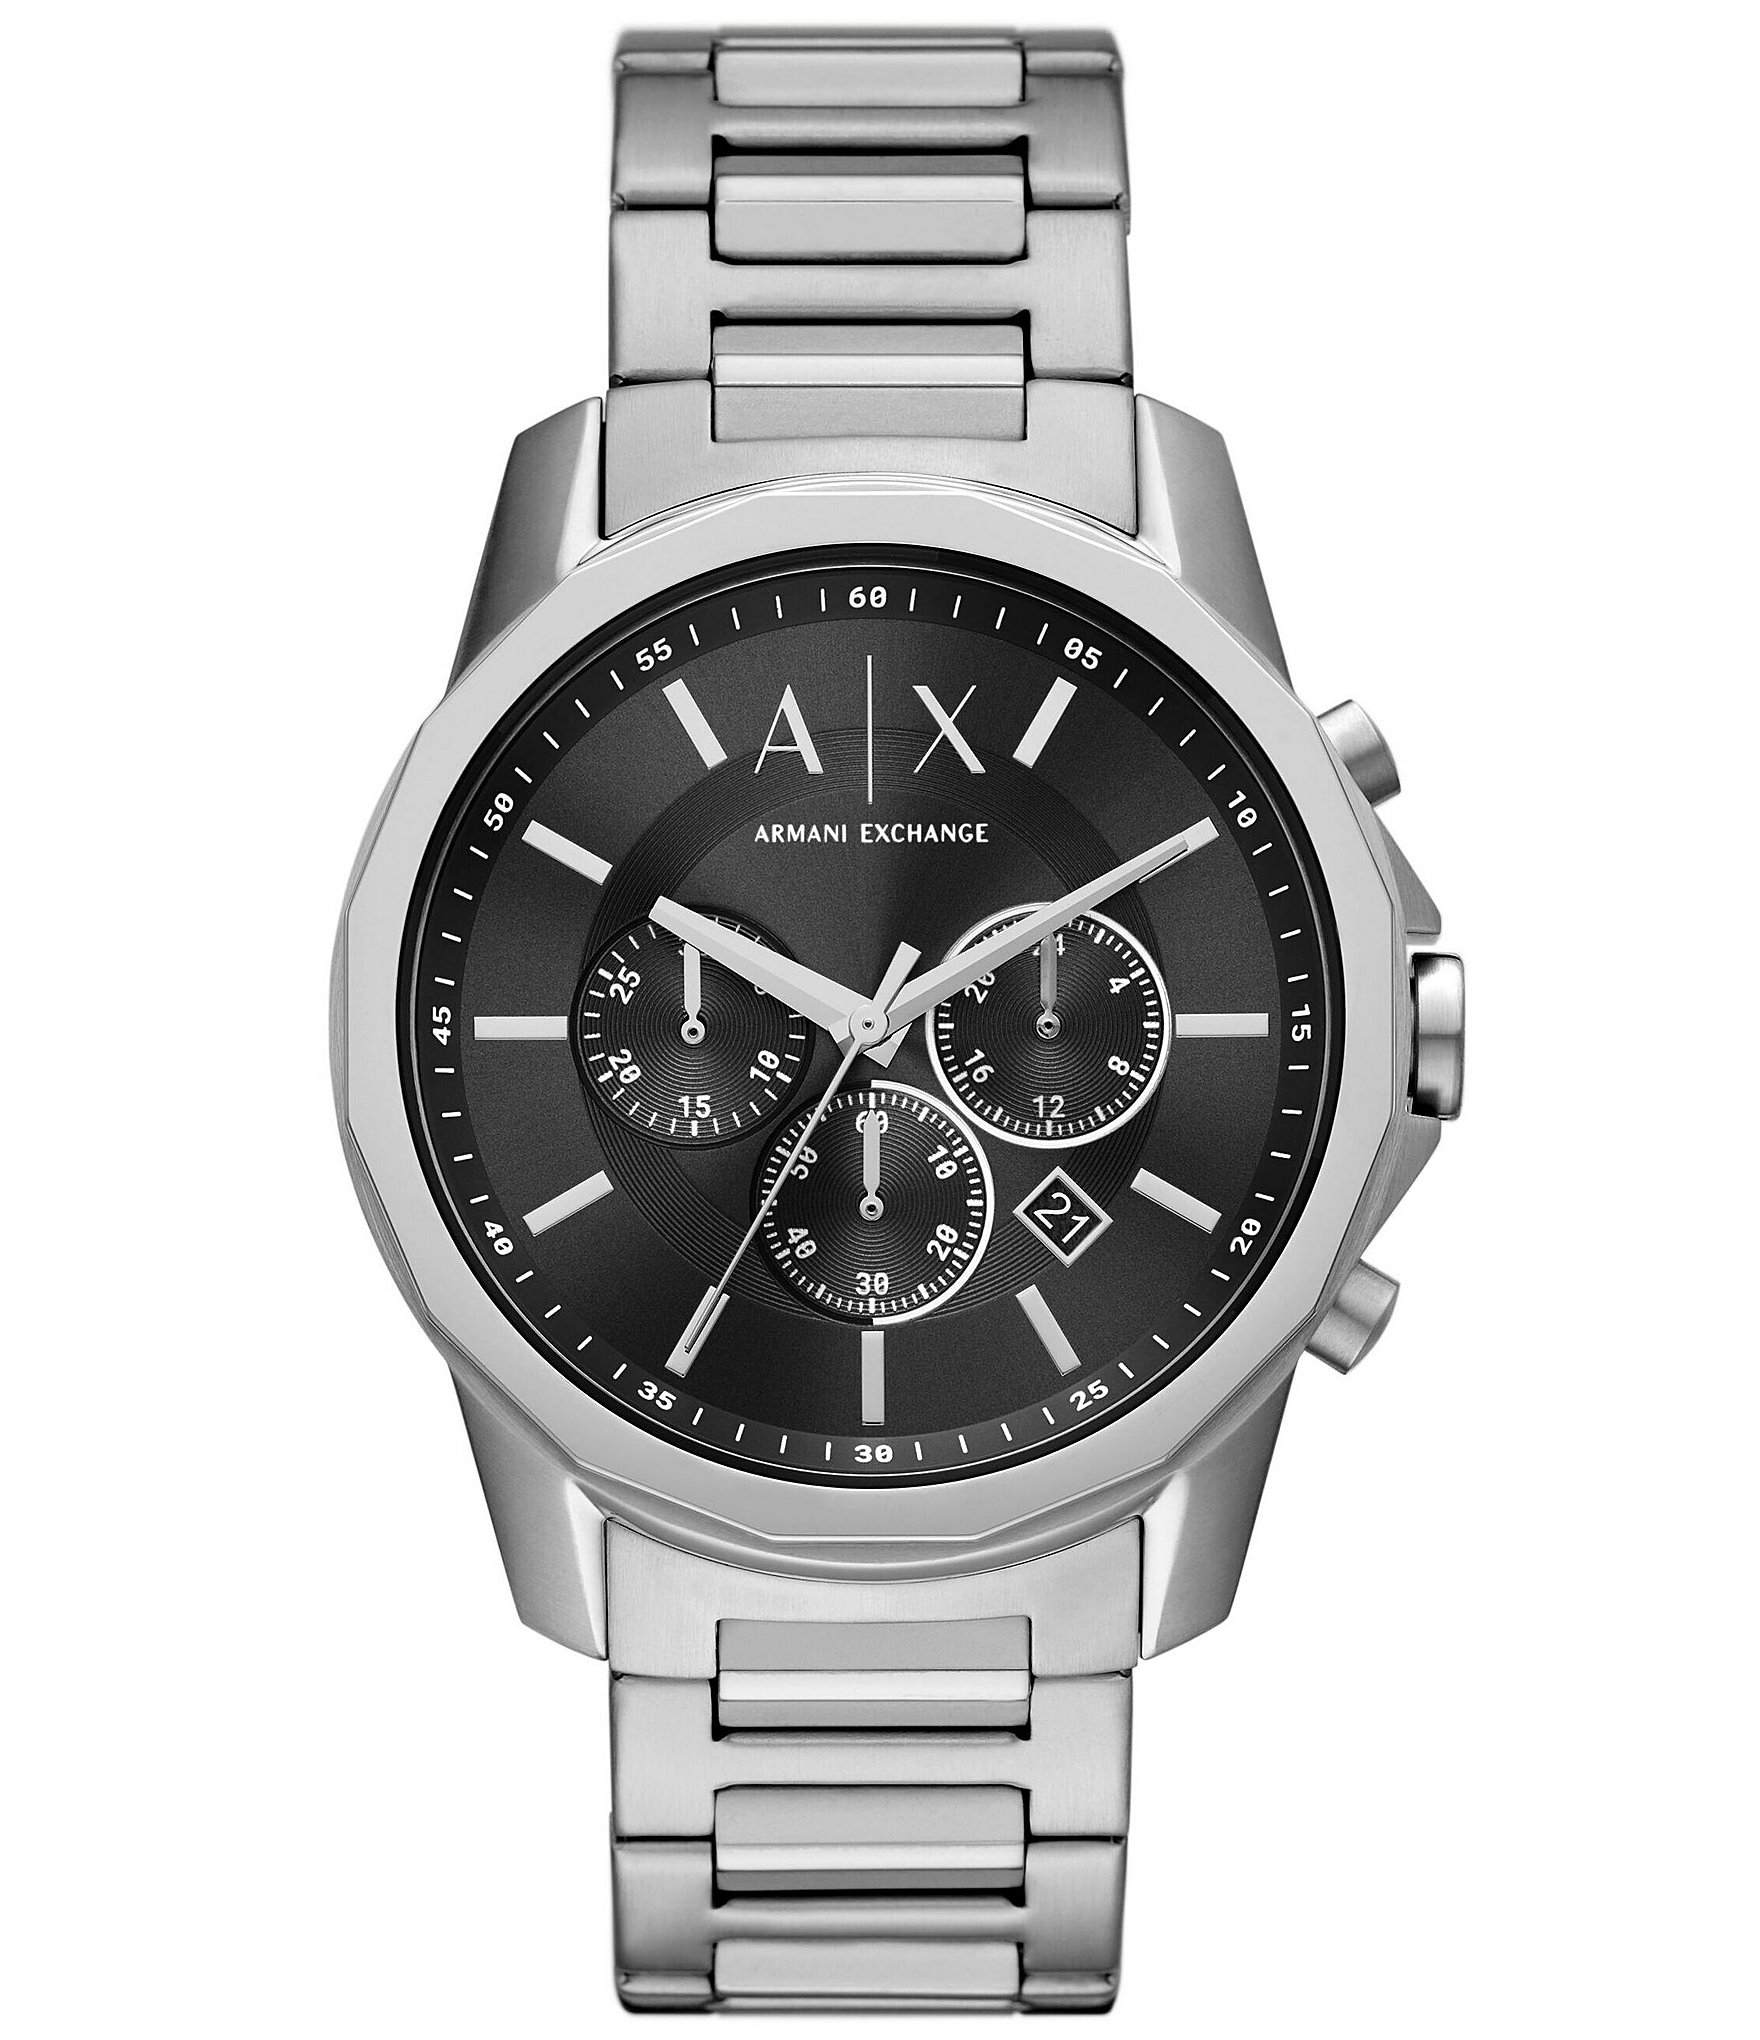 https://dimg.dillards.com/is/image/DillardsZoom/zoom/armani-exchange-chronograph-stainless-steel-watch/00000000_zi_2ffb7a1a-bb90-431a-9663-967bb97abcd4.jpg